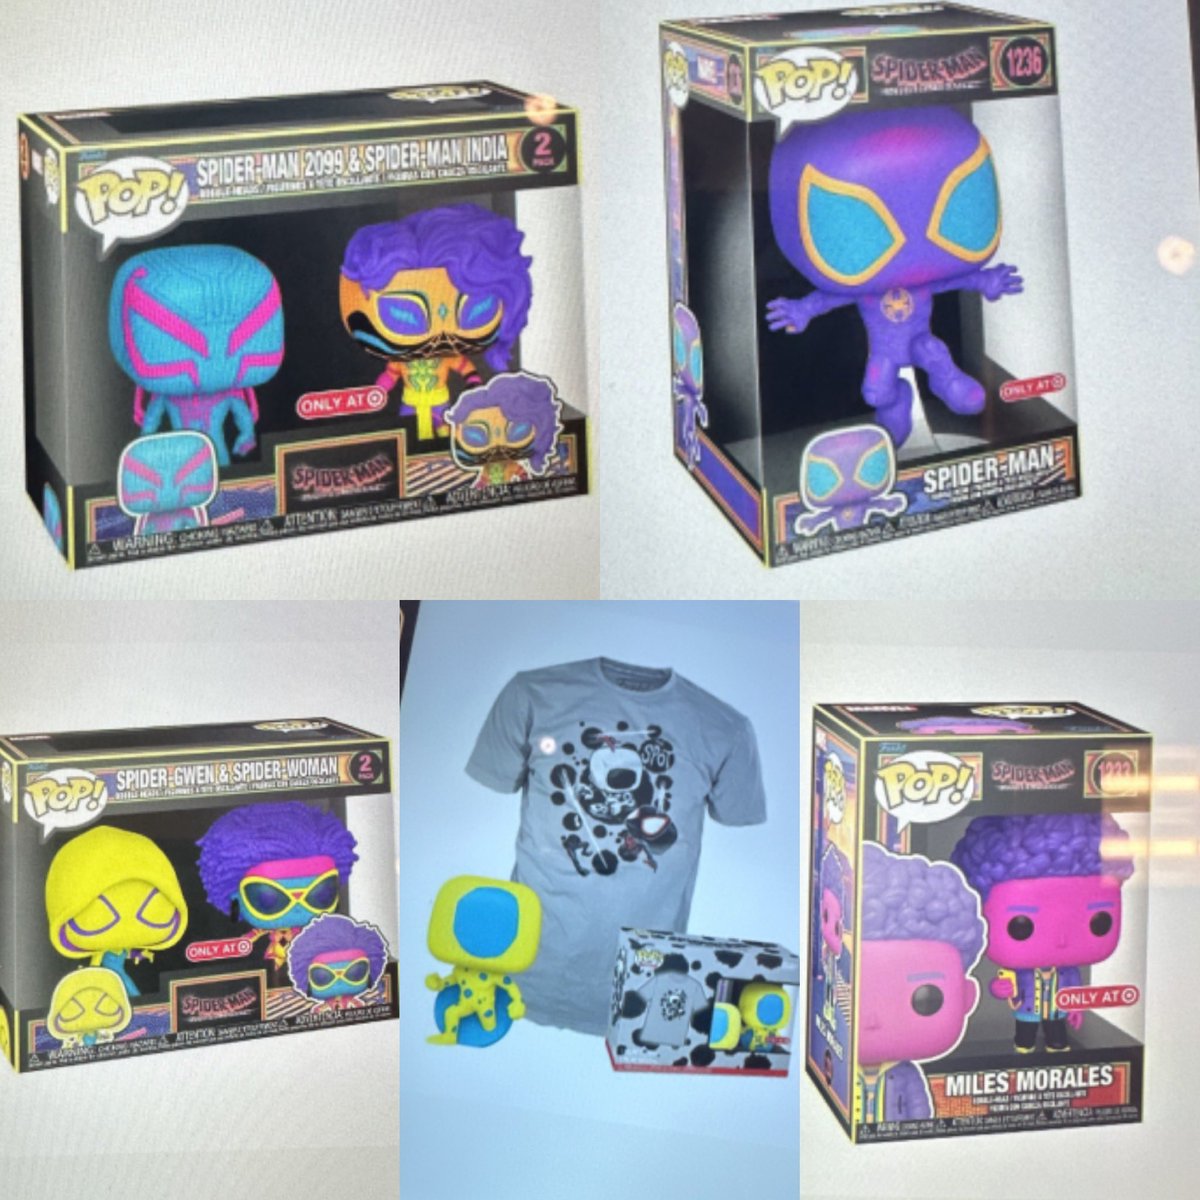 First look at the new SpiderVerse Blacklight Funko POPs! #Spiderverse #Spiderman #AcrossTheSpiderVerse #FPN #FunkoPOPNews #Funko #POP #POPVinyl #FunkoPOP #FunkoSoda